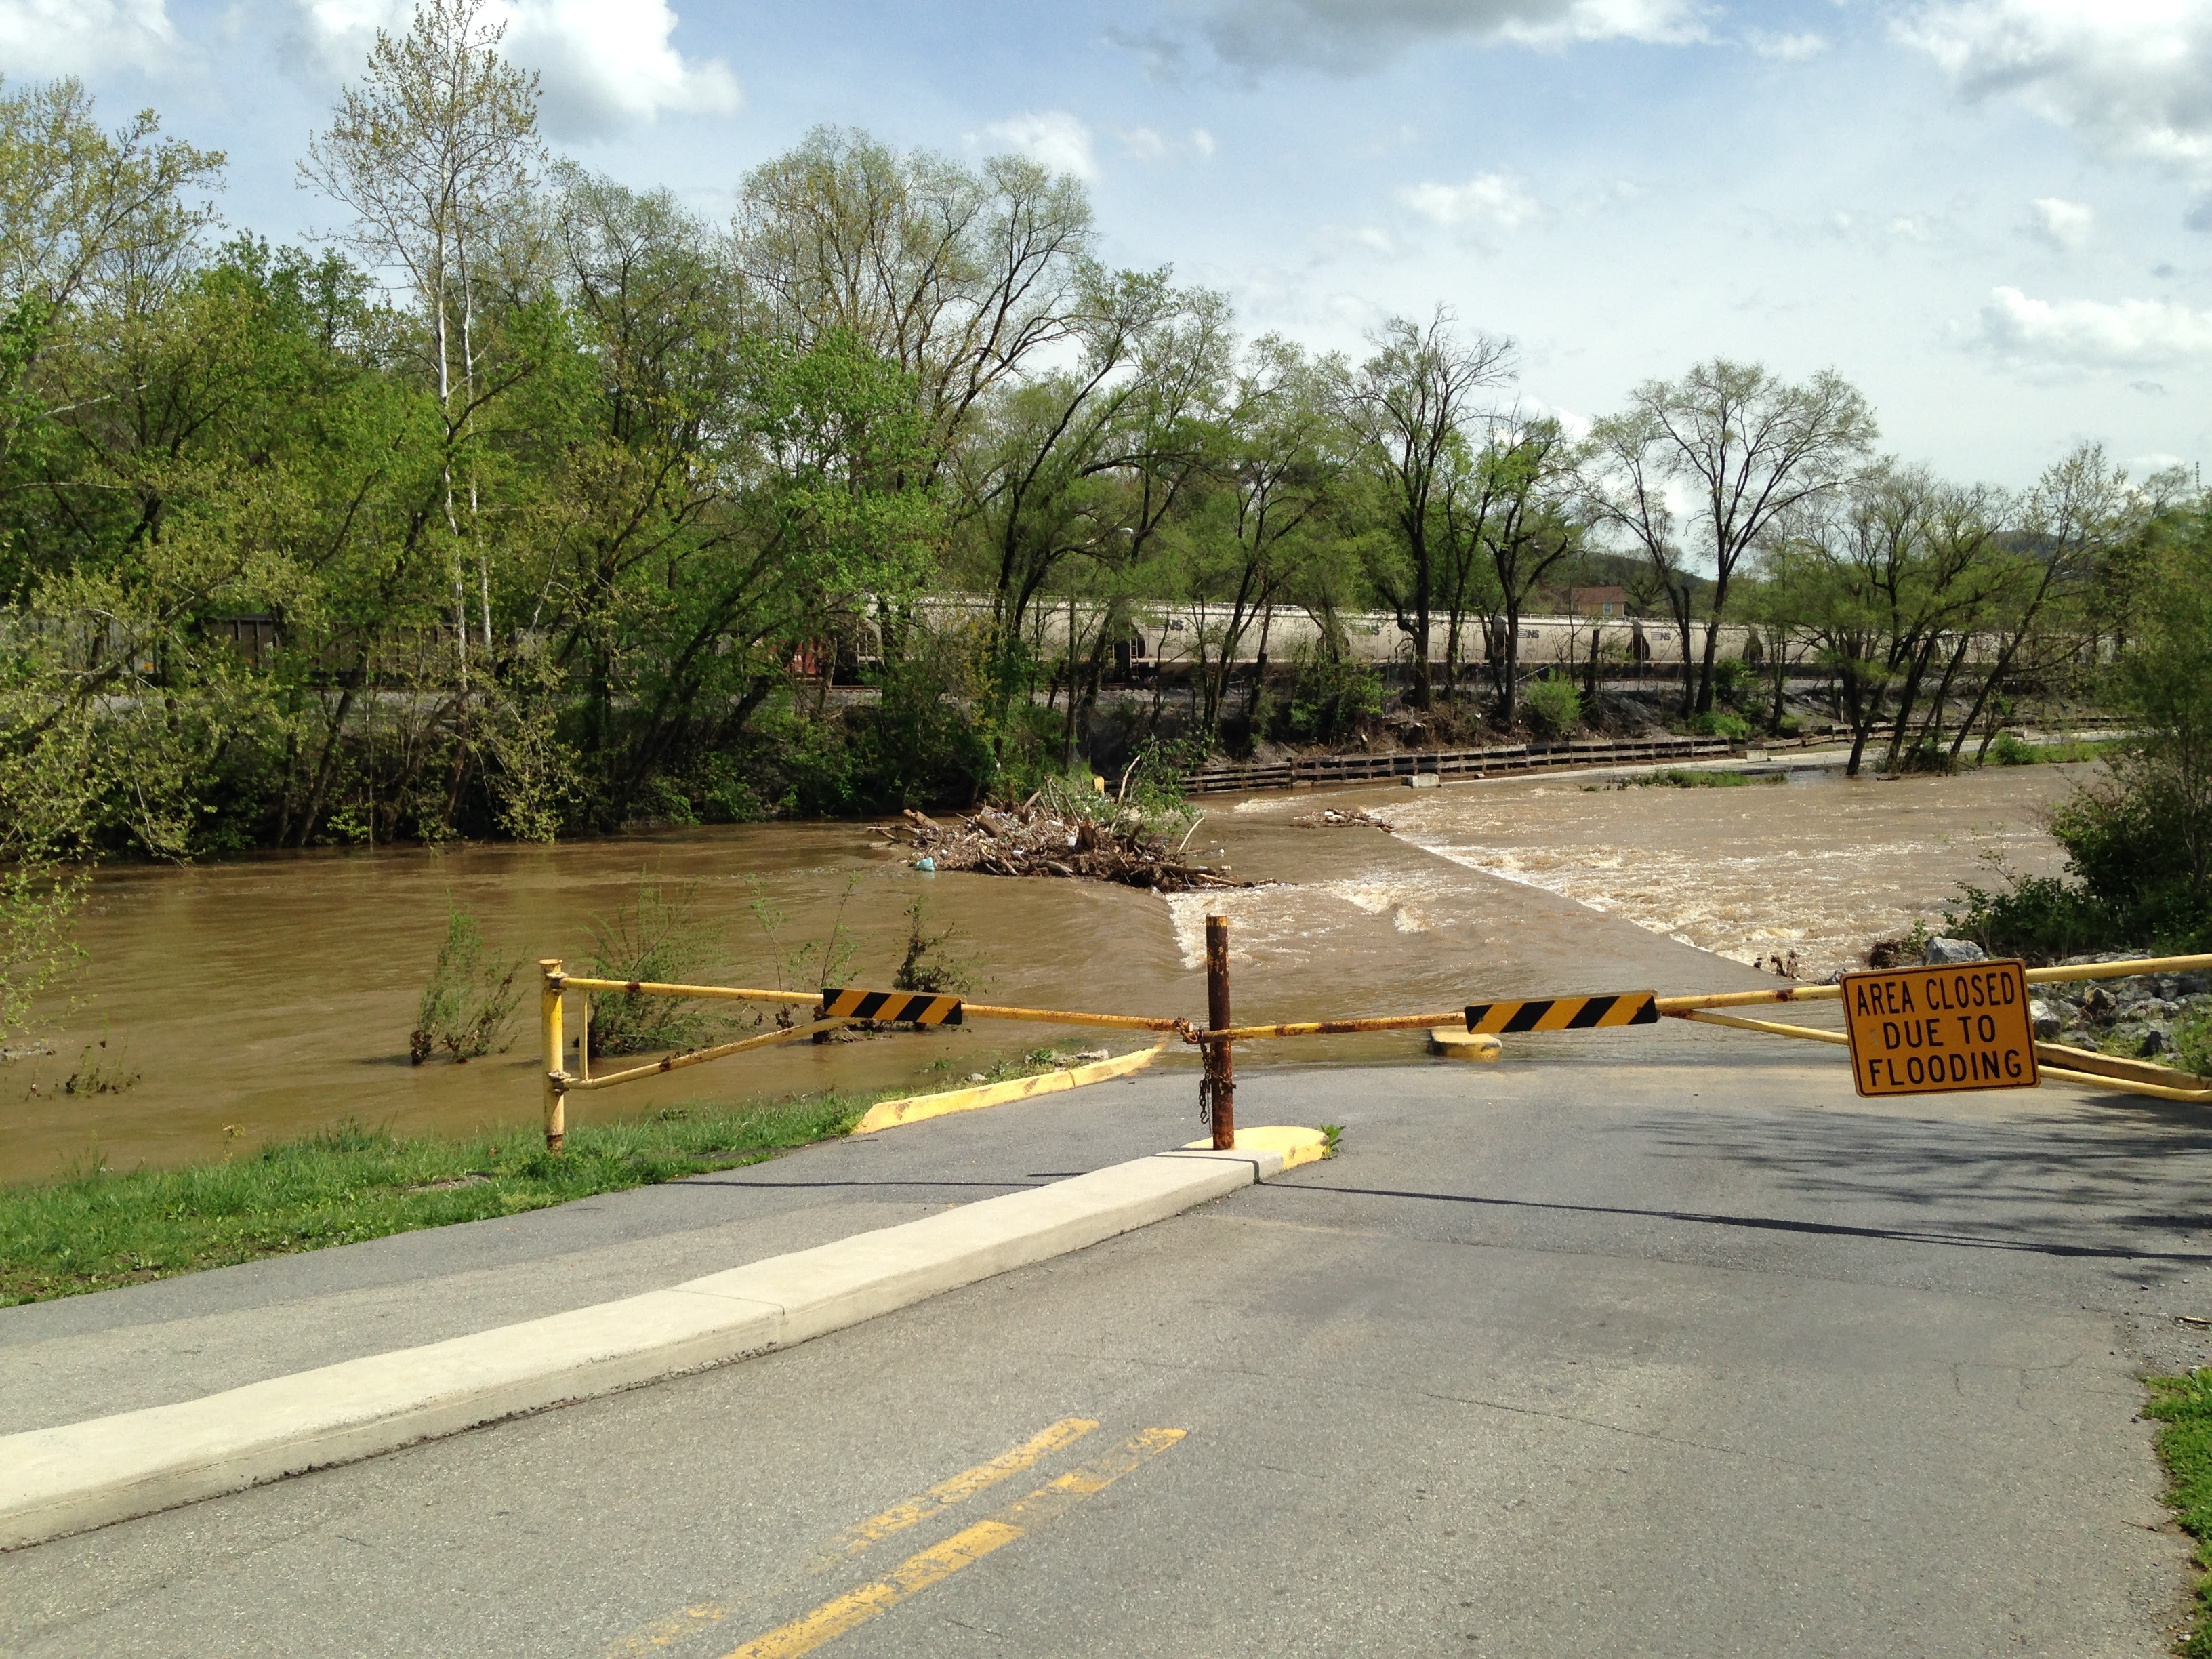 The image shows a road leading to a river or stream that is currently experiencing flooding. The road is blocked off with a yellow and black striped barrier and a sign that reads "AREA CLOSED DUE TO FLOODING." The water level in the river is high, and the current appears strong, with debris visible in the water. The surrounding area is lush with green trees and vegetation, indicating a rural or natural setting. The sky above is partly cloudy.